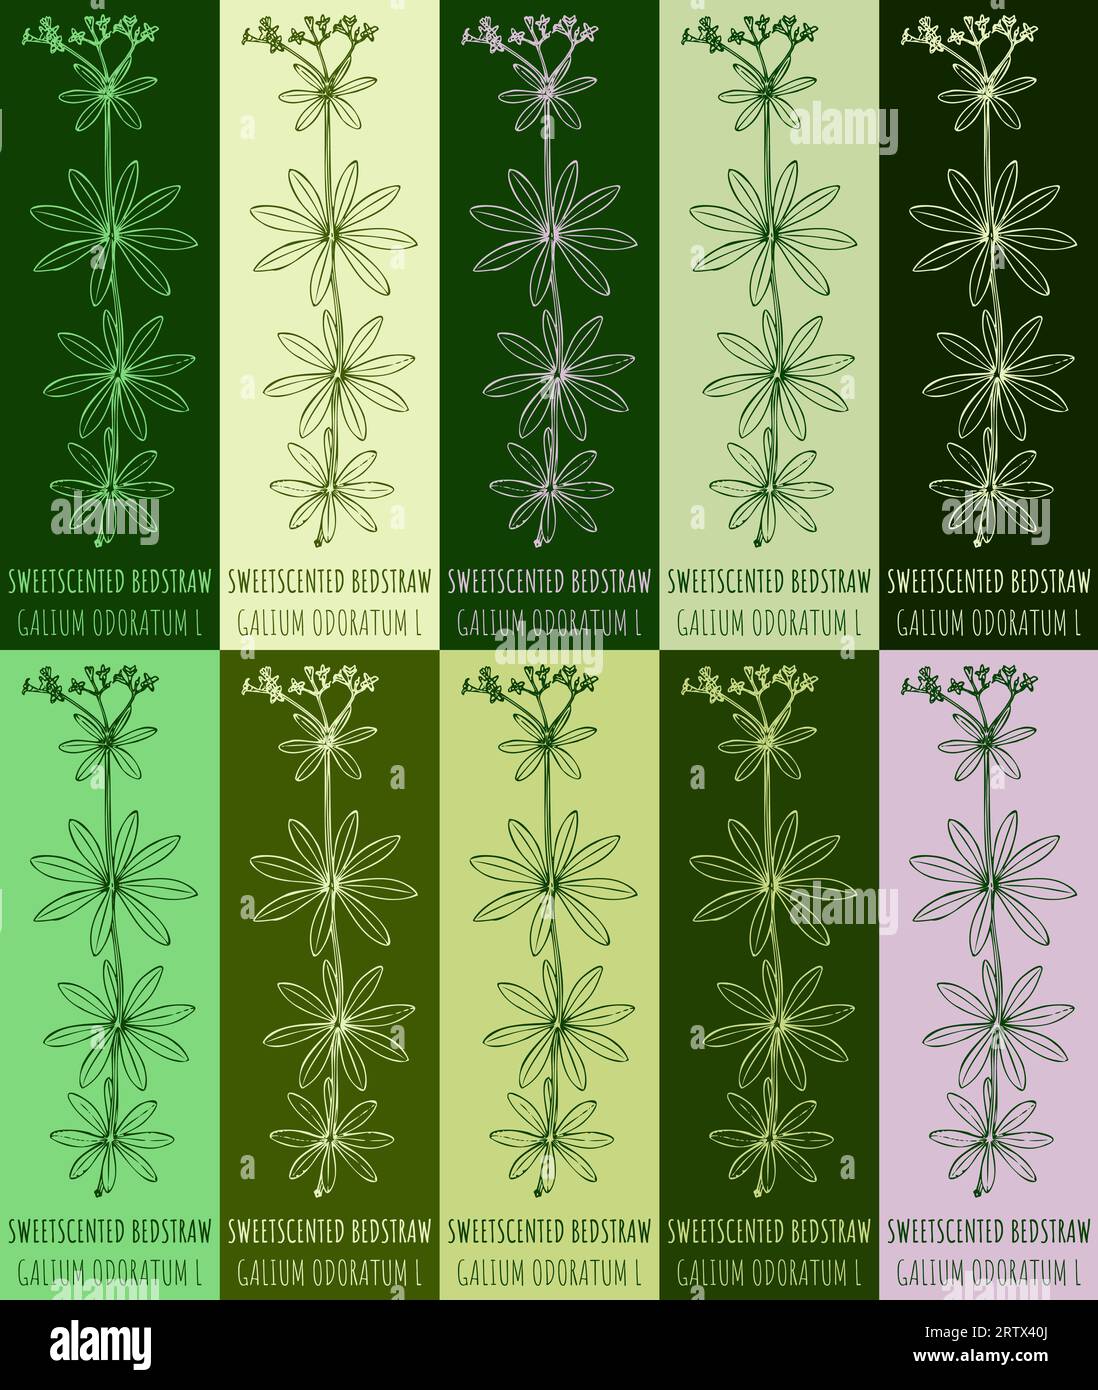 Set of vector drawing of SWEETSCENTED BEDSTRAW in various colors. Hand drawn illustration. Latin name GALIUM ODORATUM L. Stock Photo